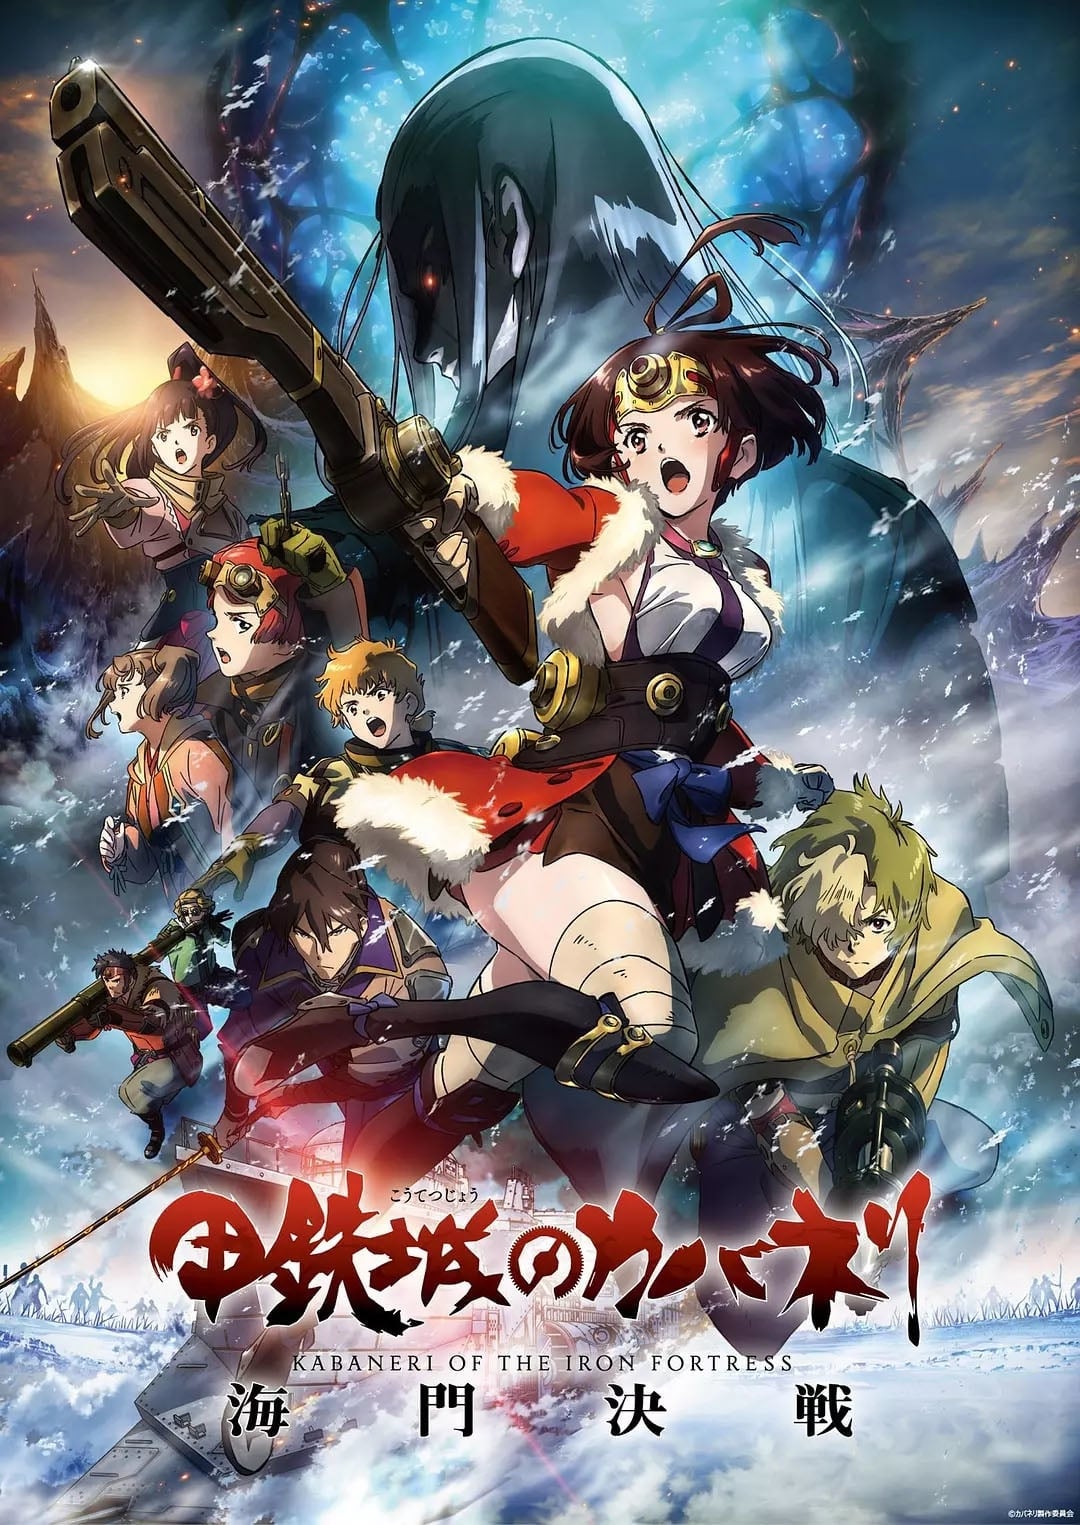 Kabaneri of the Iron Fortress - The Battle of Unato